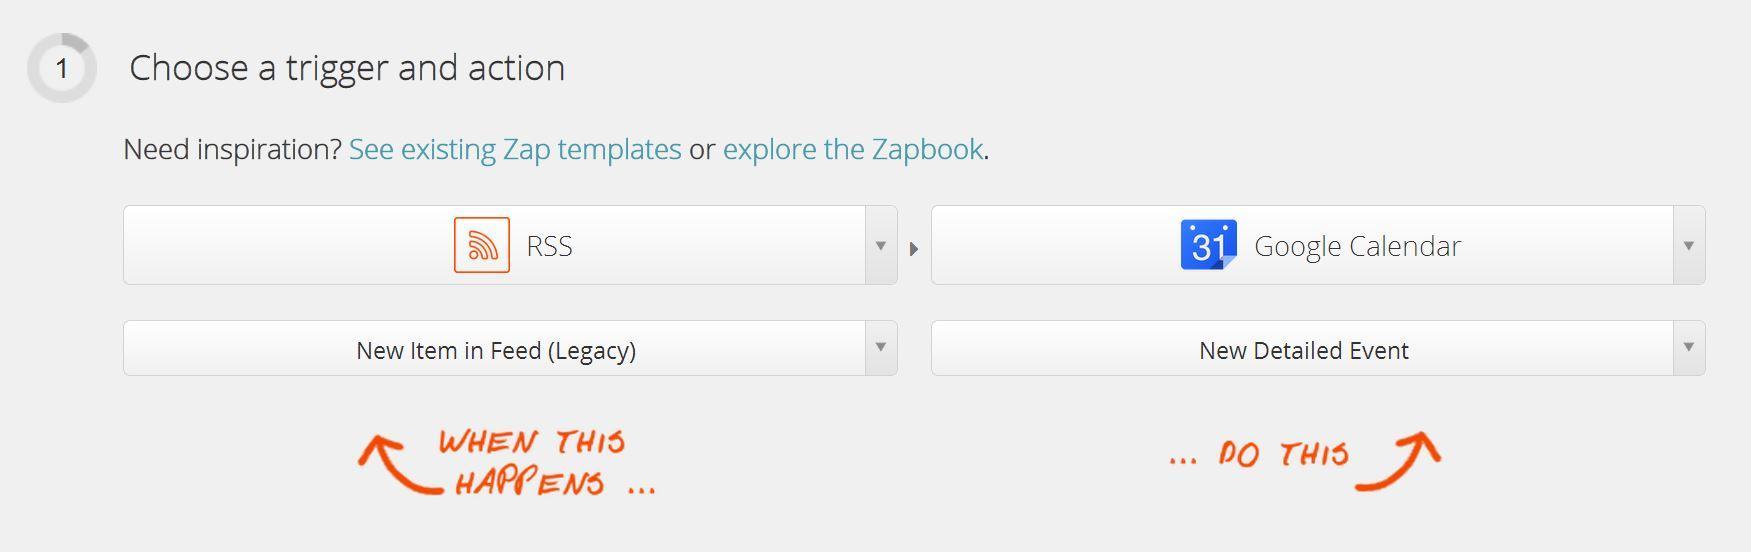 To use Zapier with Google Calendar, tell it to create a "New Detailed Event"